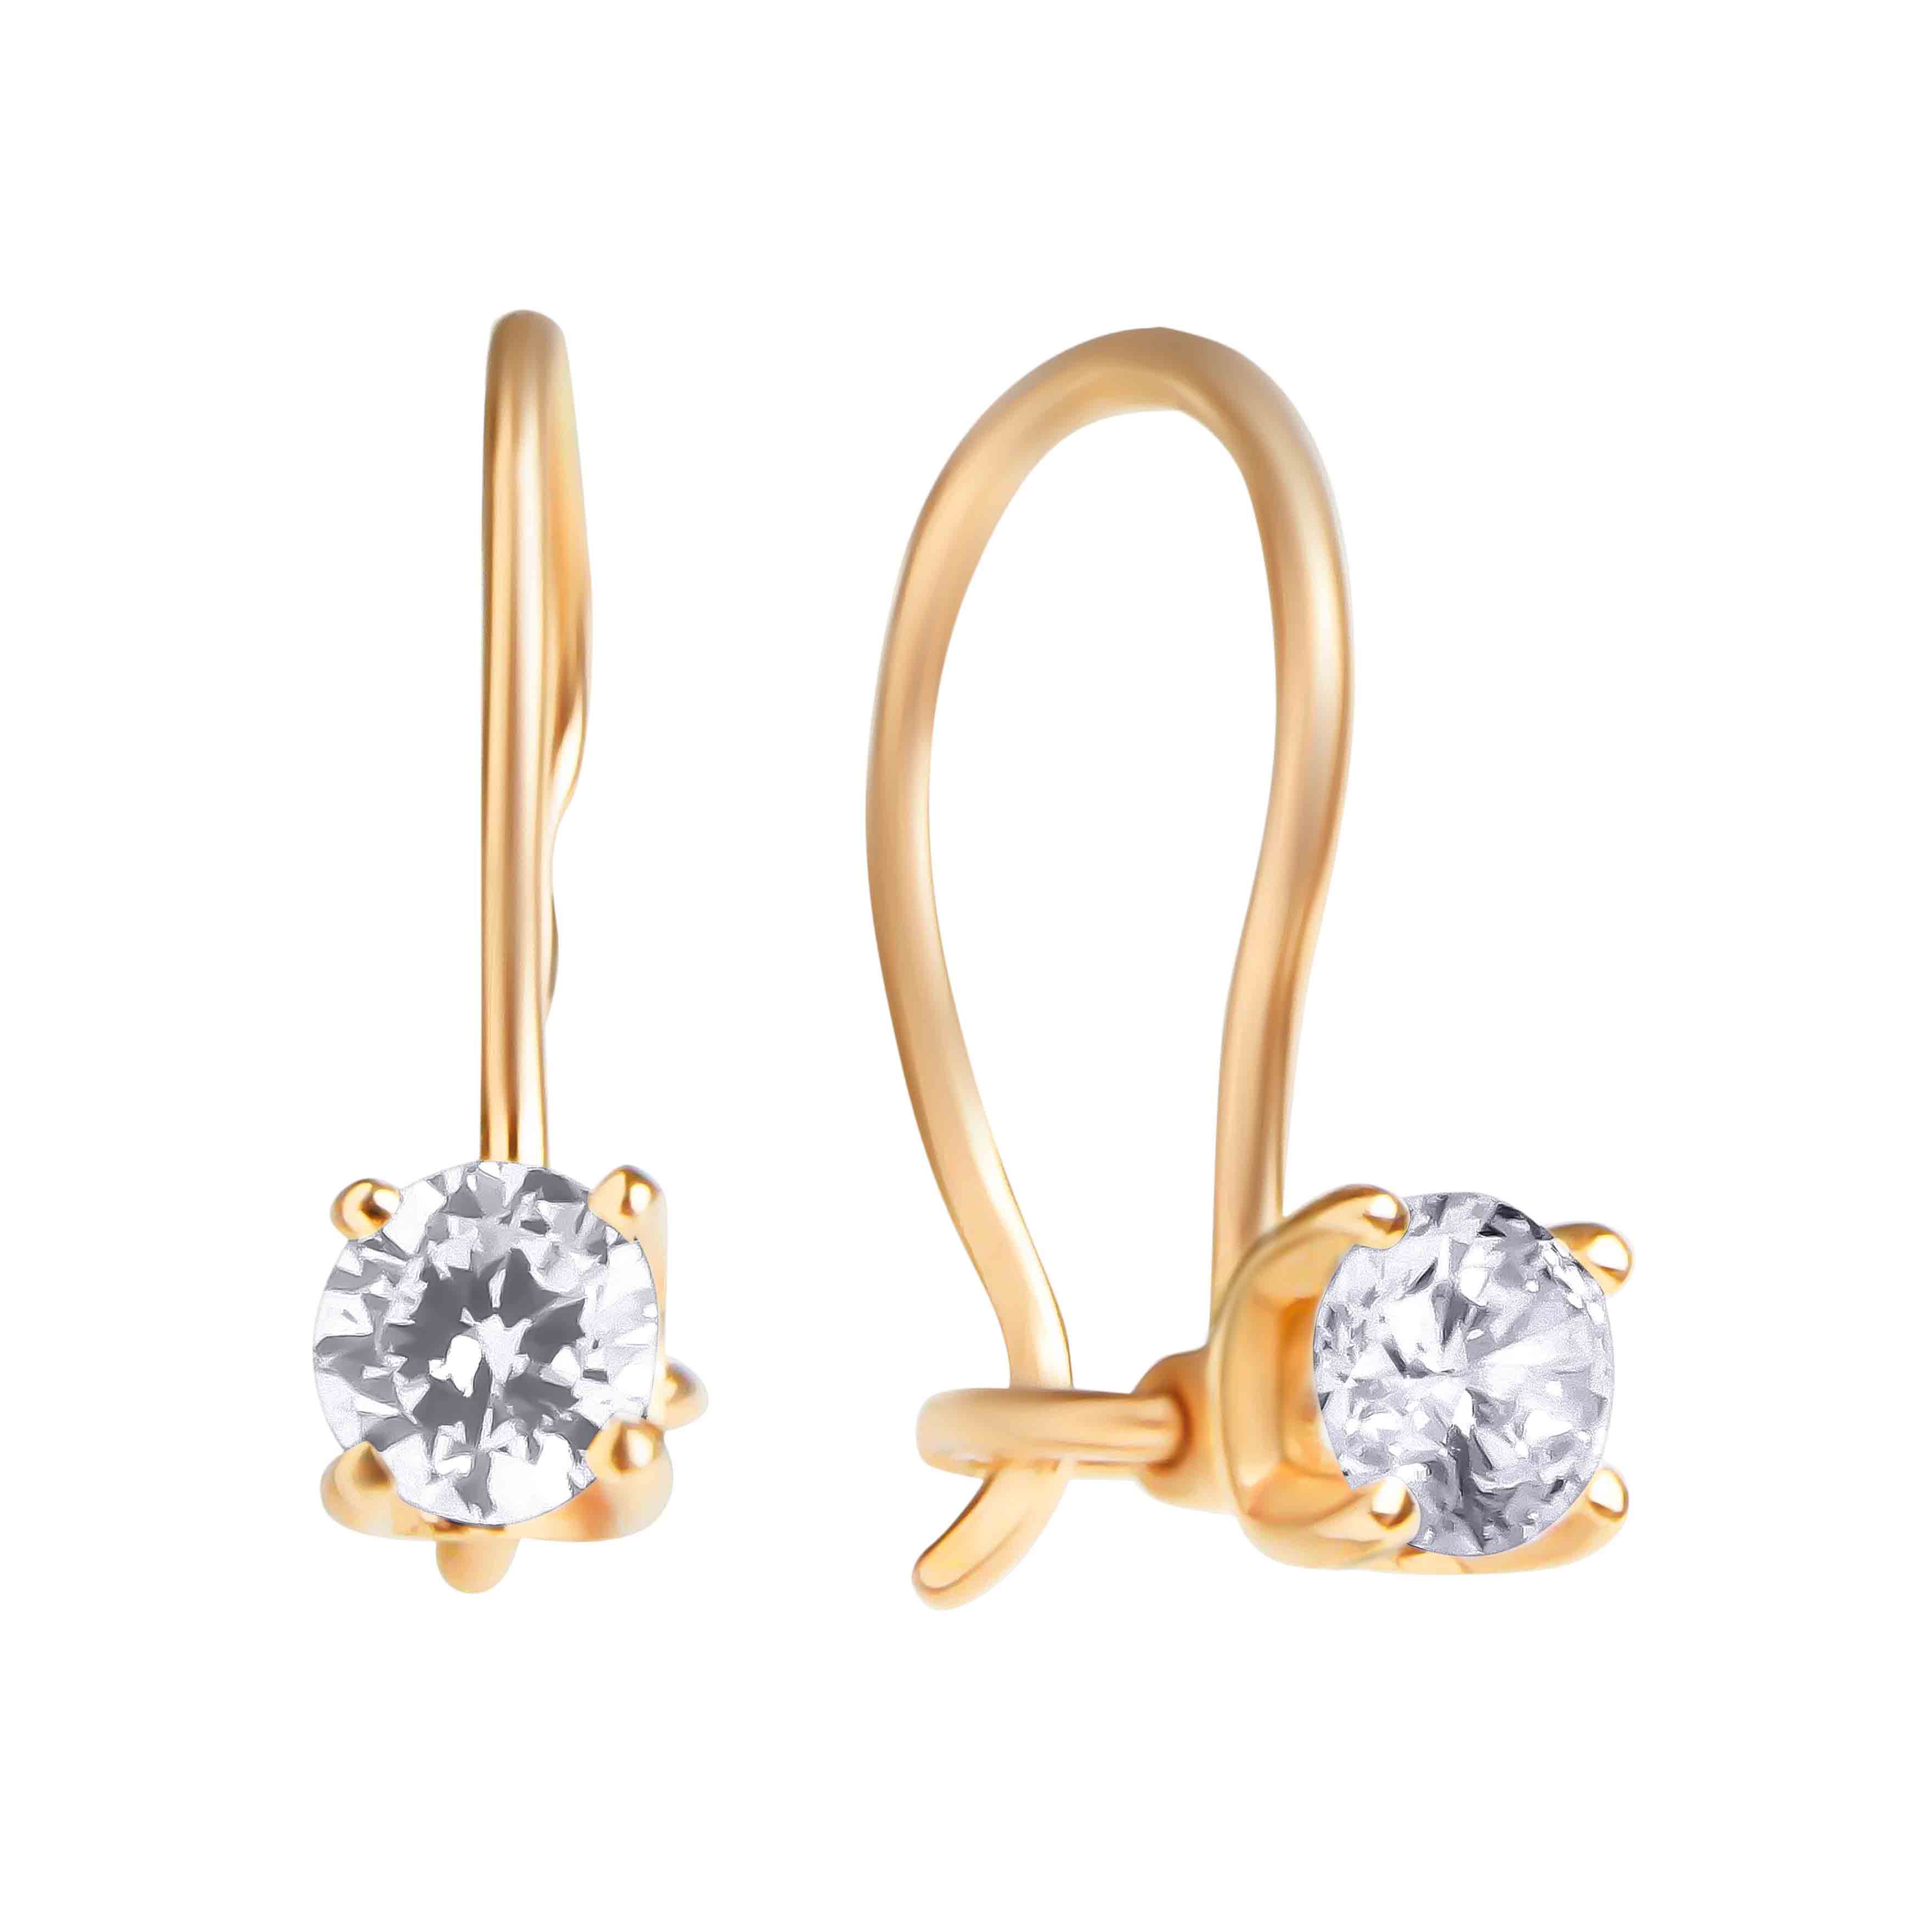 Kids Earrings - Sparkle and Shine! Buy Now at Bhima Gold Online